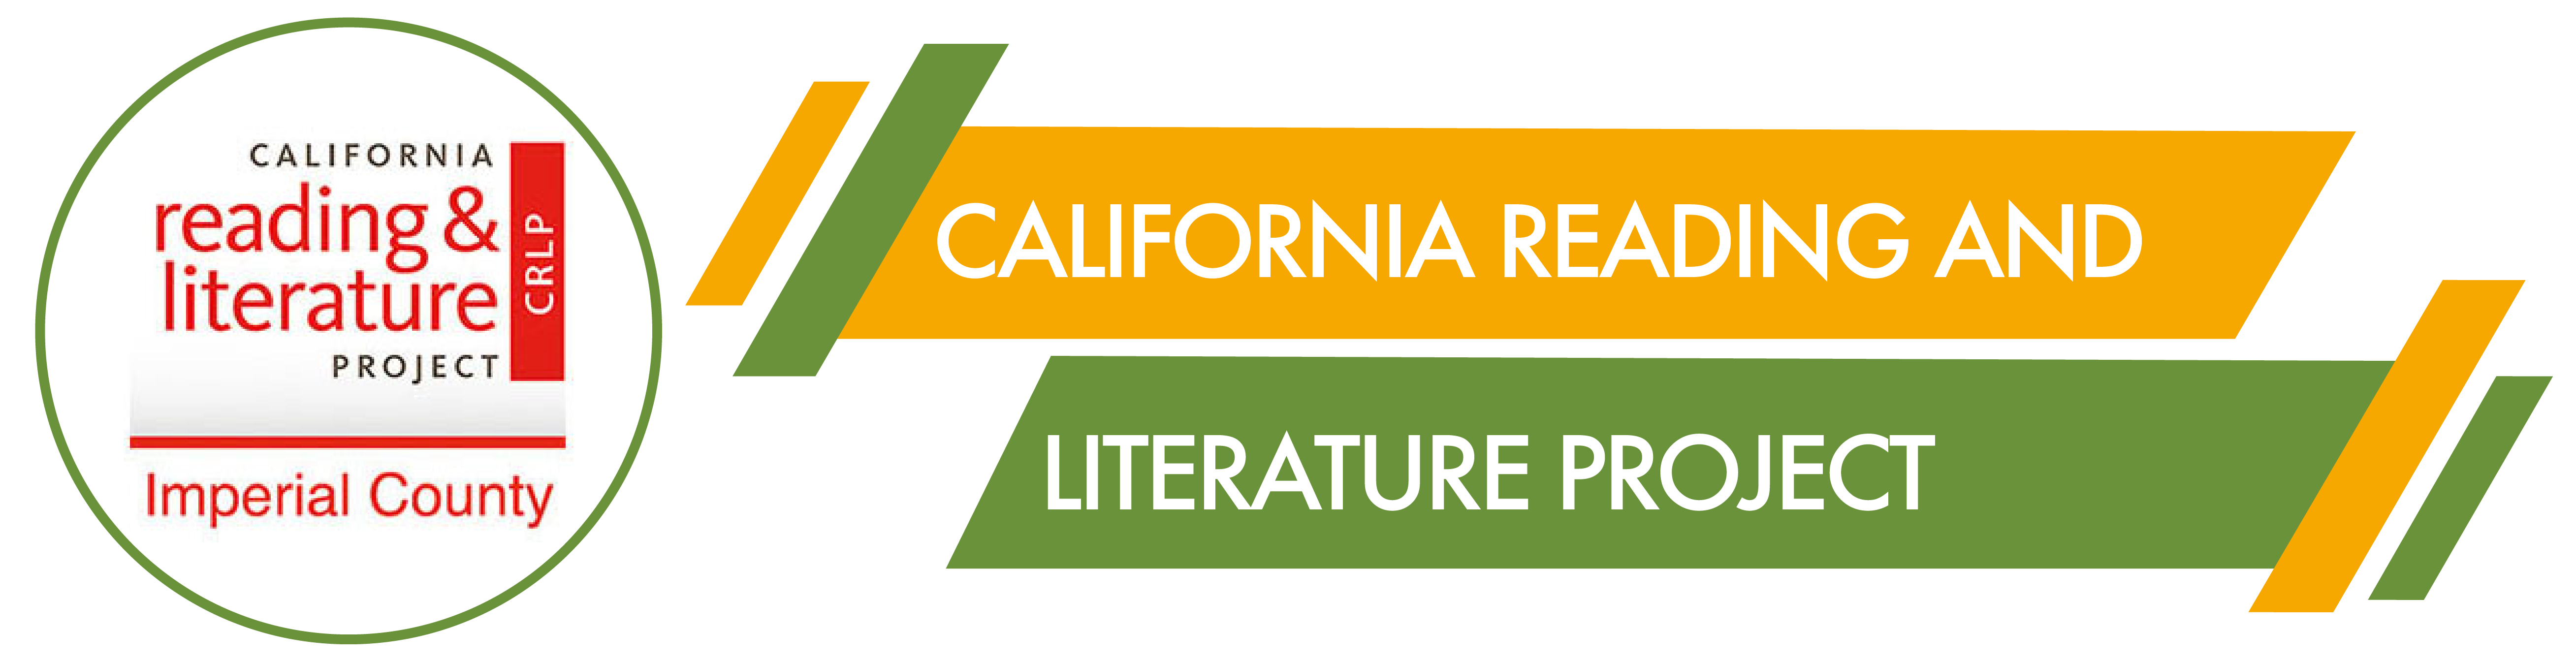 California Reading and Literature Project Banner